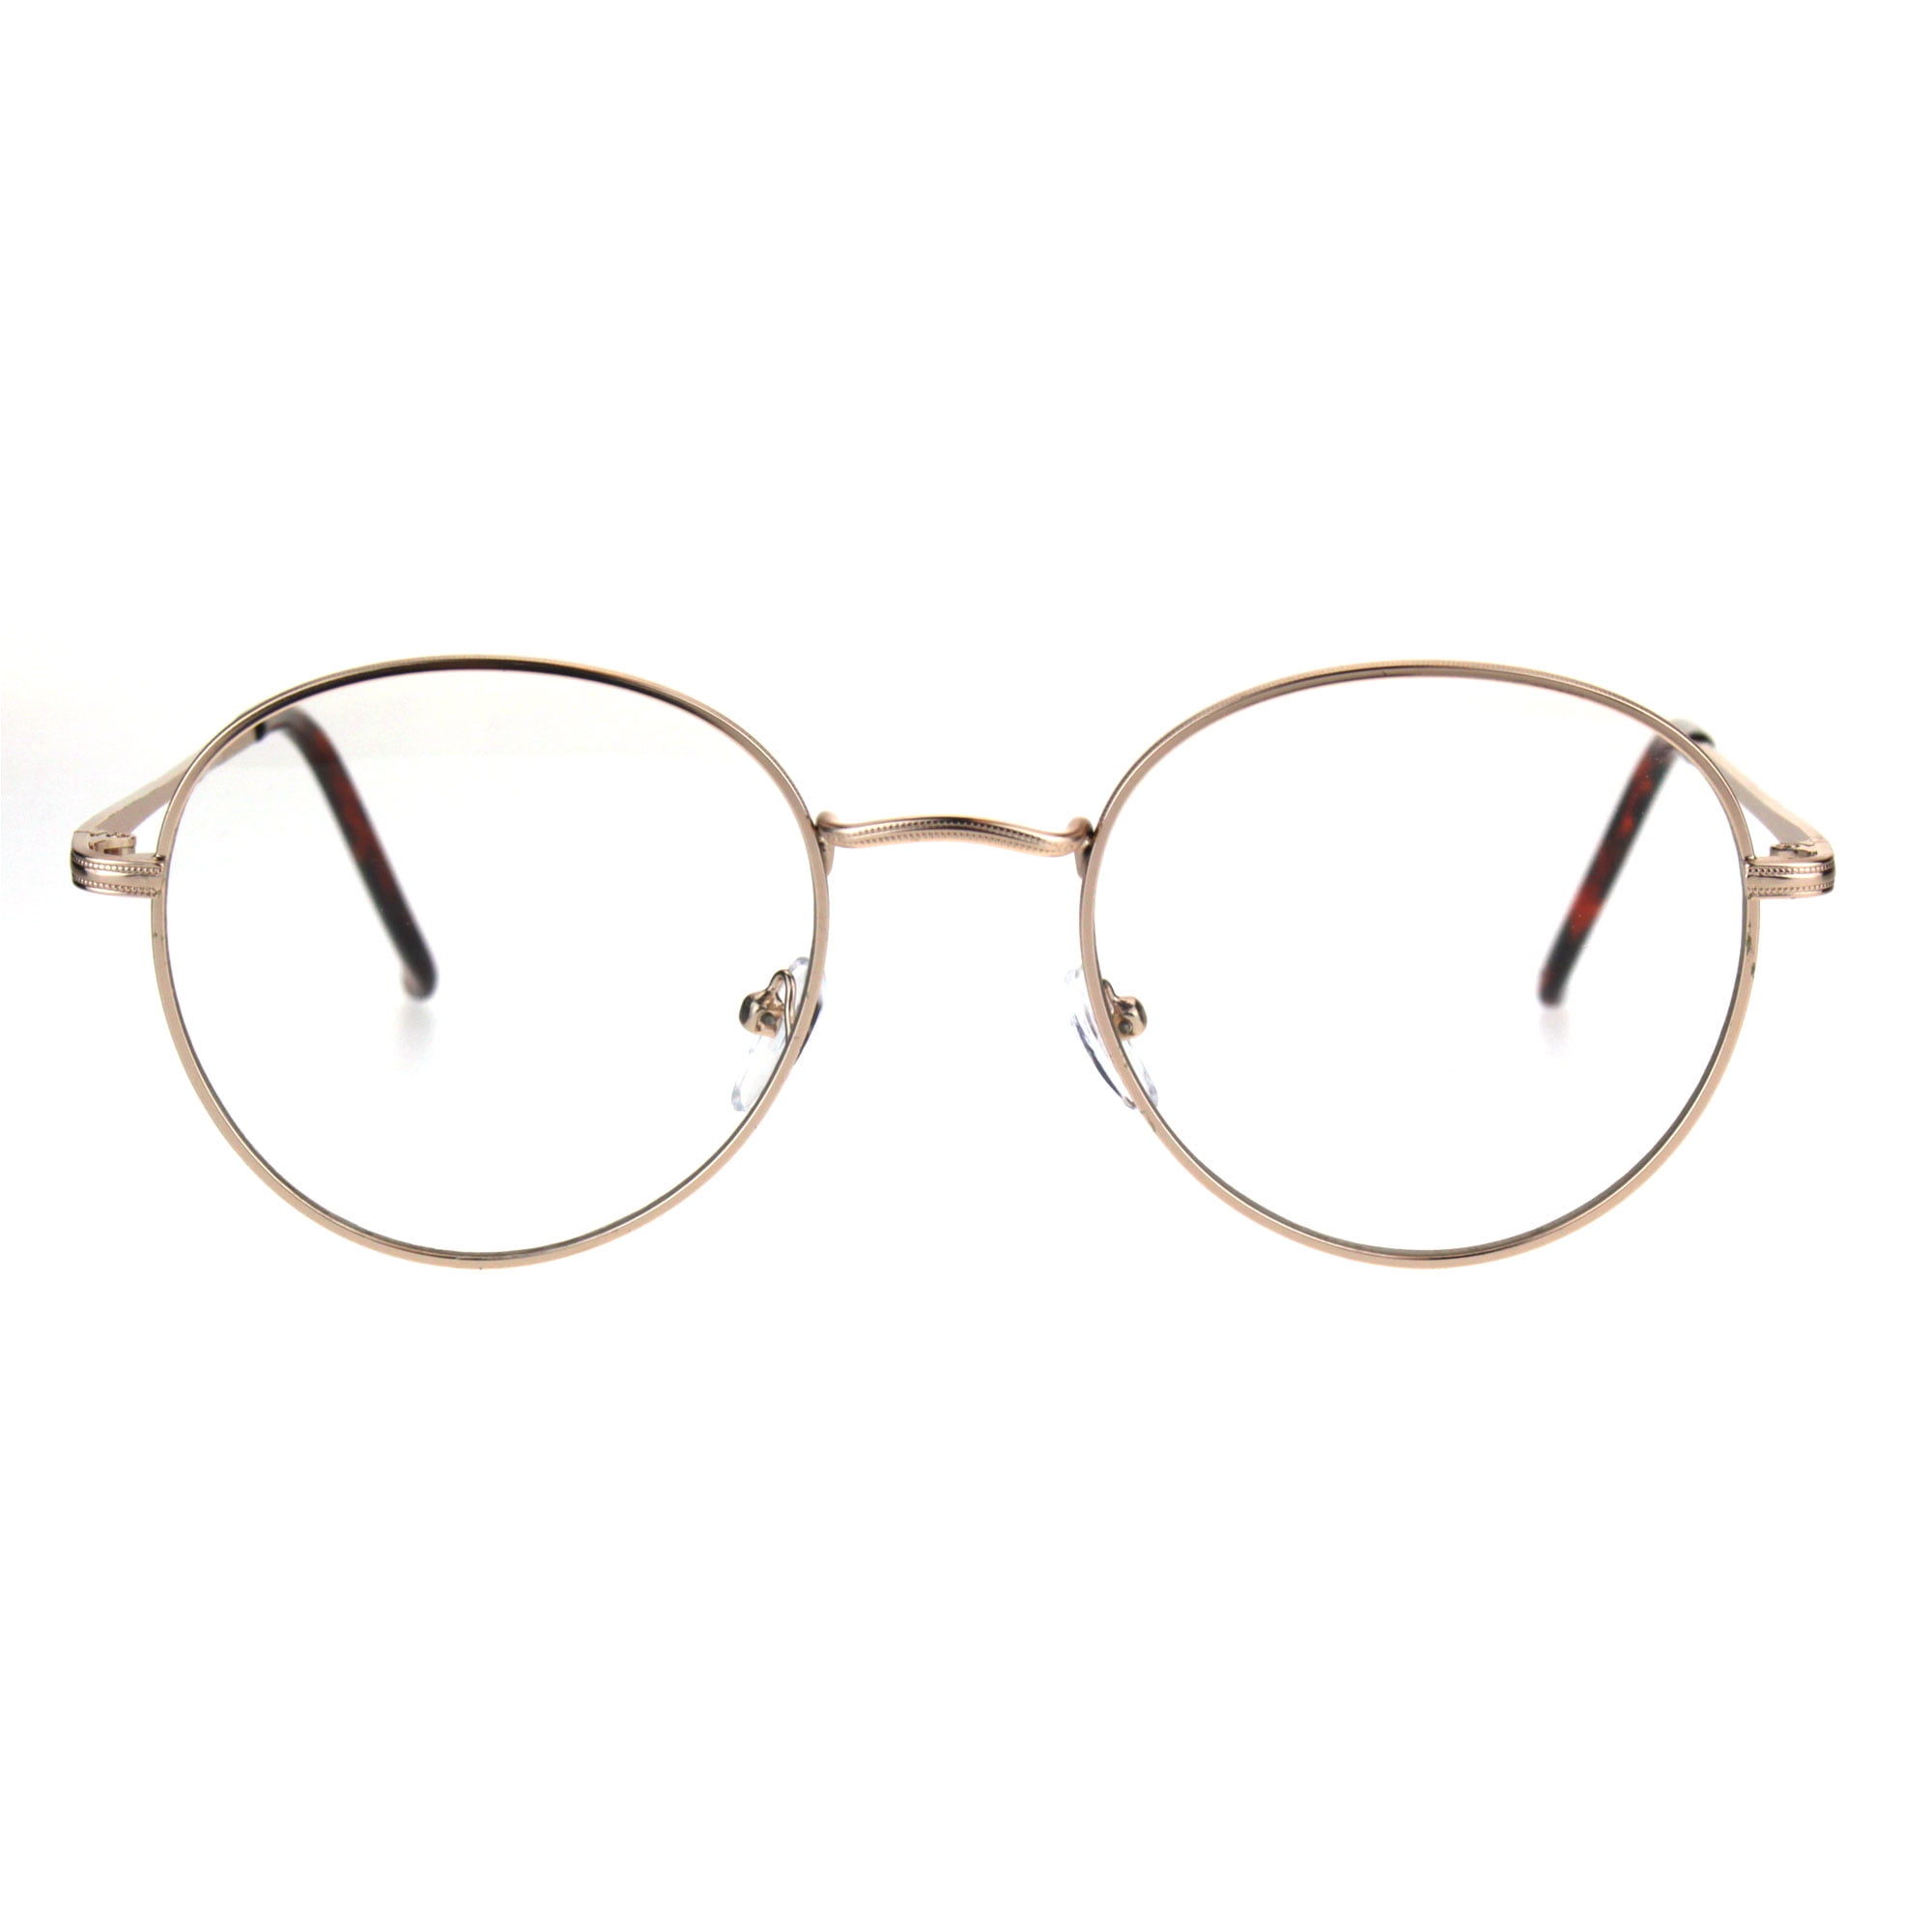 CLASSIC VINTAGE 70's RETRO Style Clear Lens EYE GLASSES Round Gold Fashion Frame 